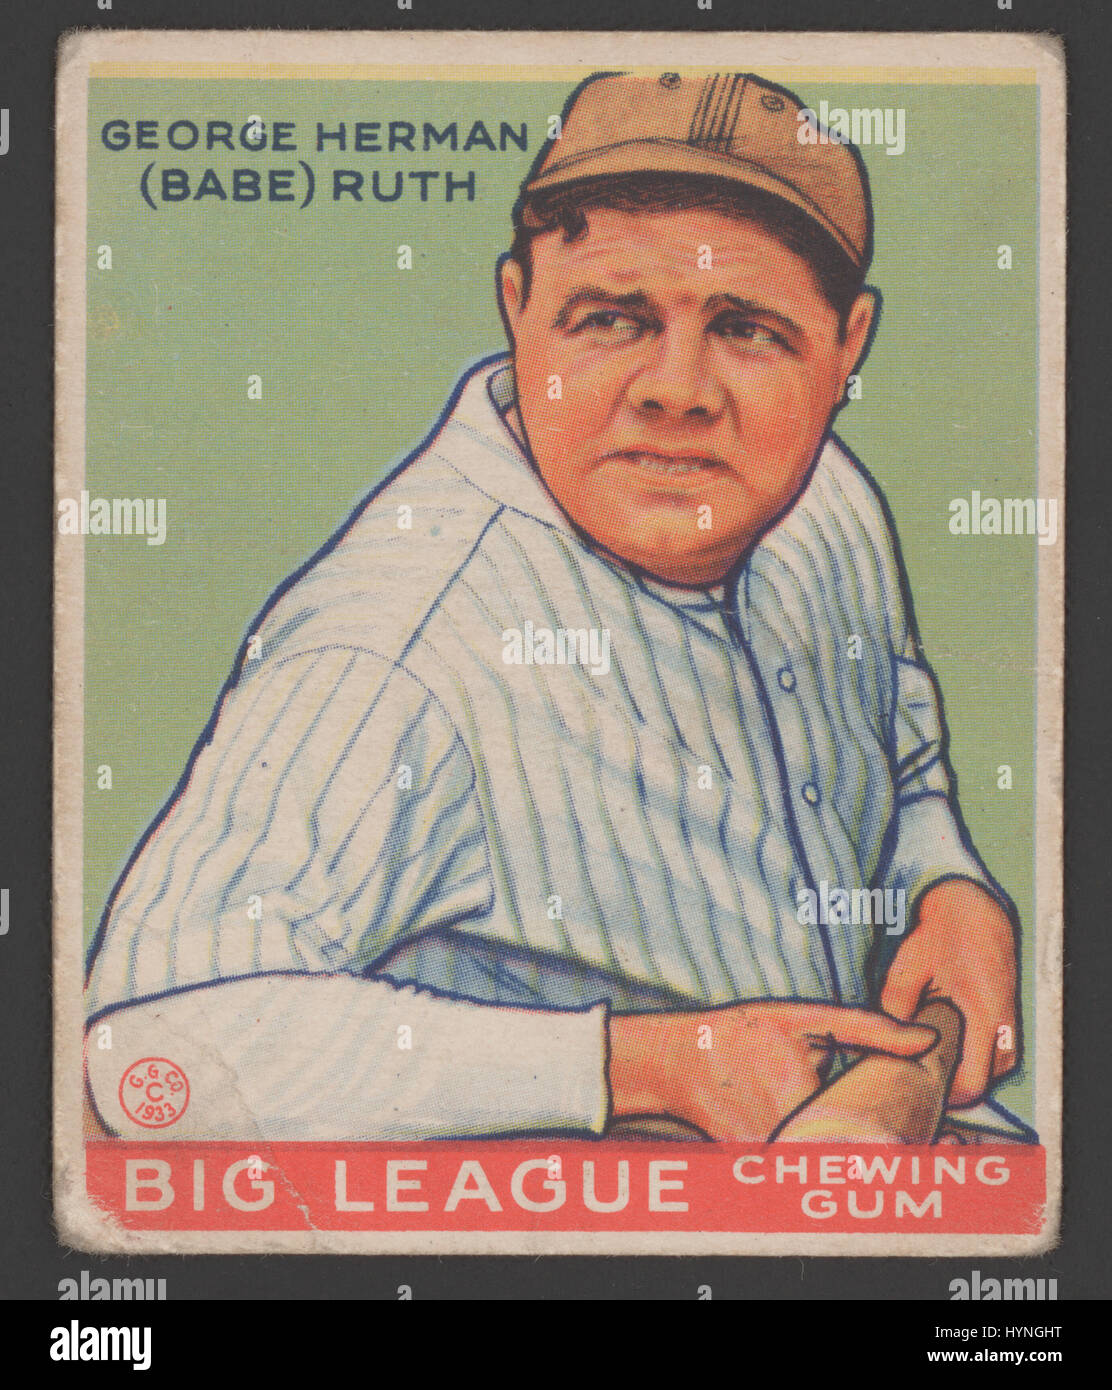 George Herman (Babe Ruth), Big League Chewing-gum. 1933. Banque D'Images